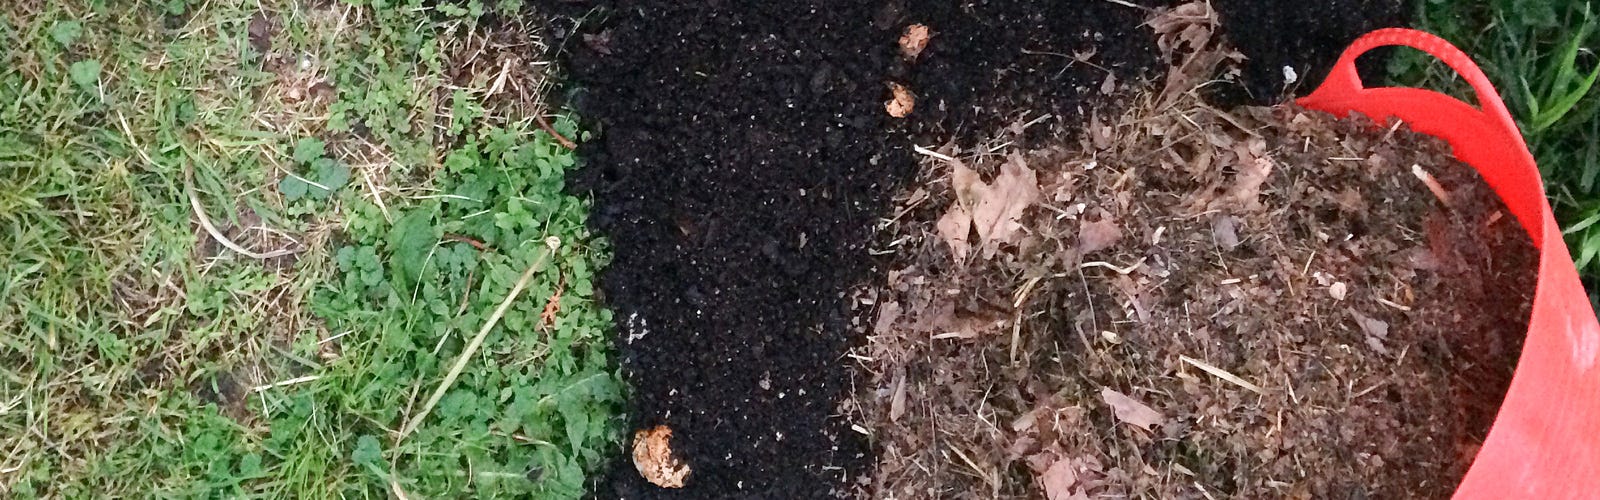 How To Build Healthy Soil With Compost